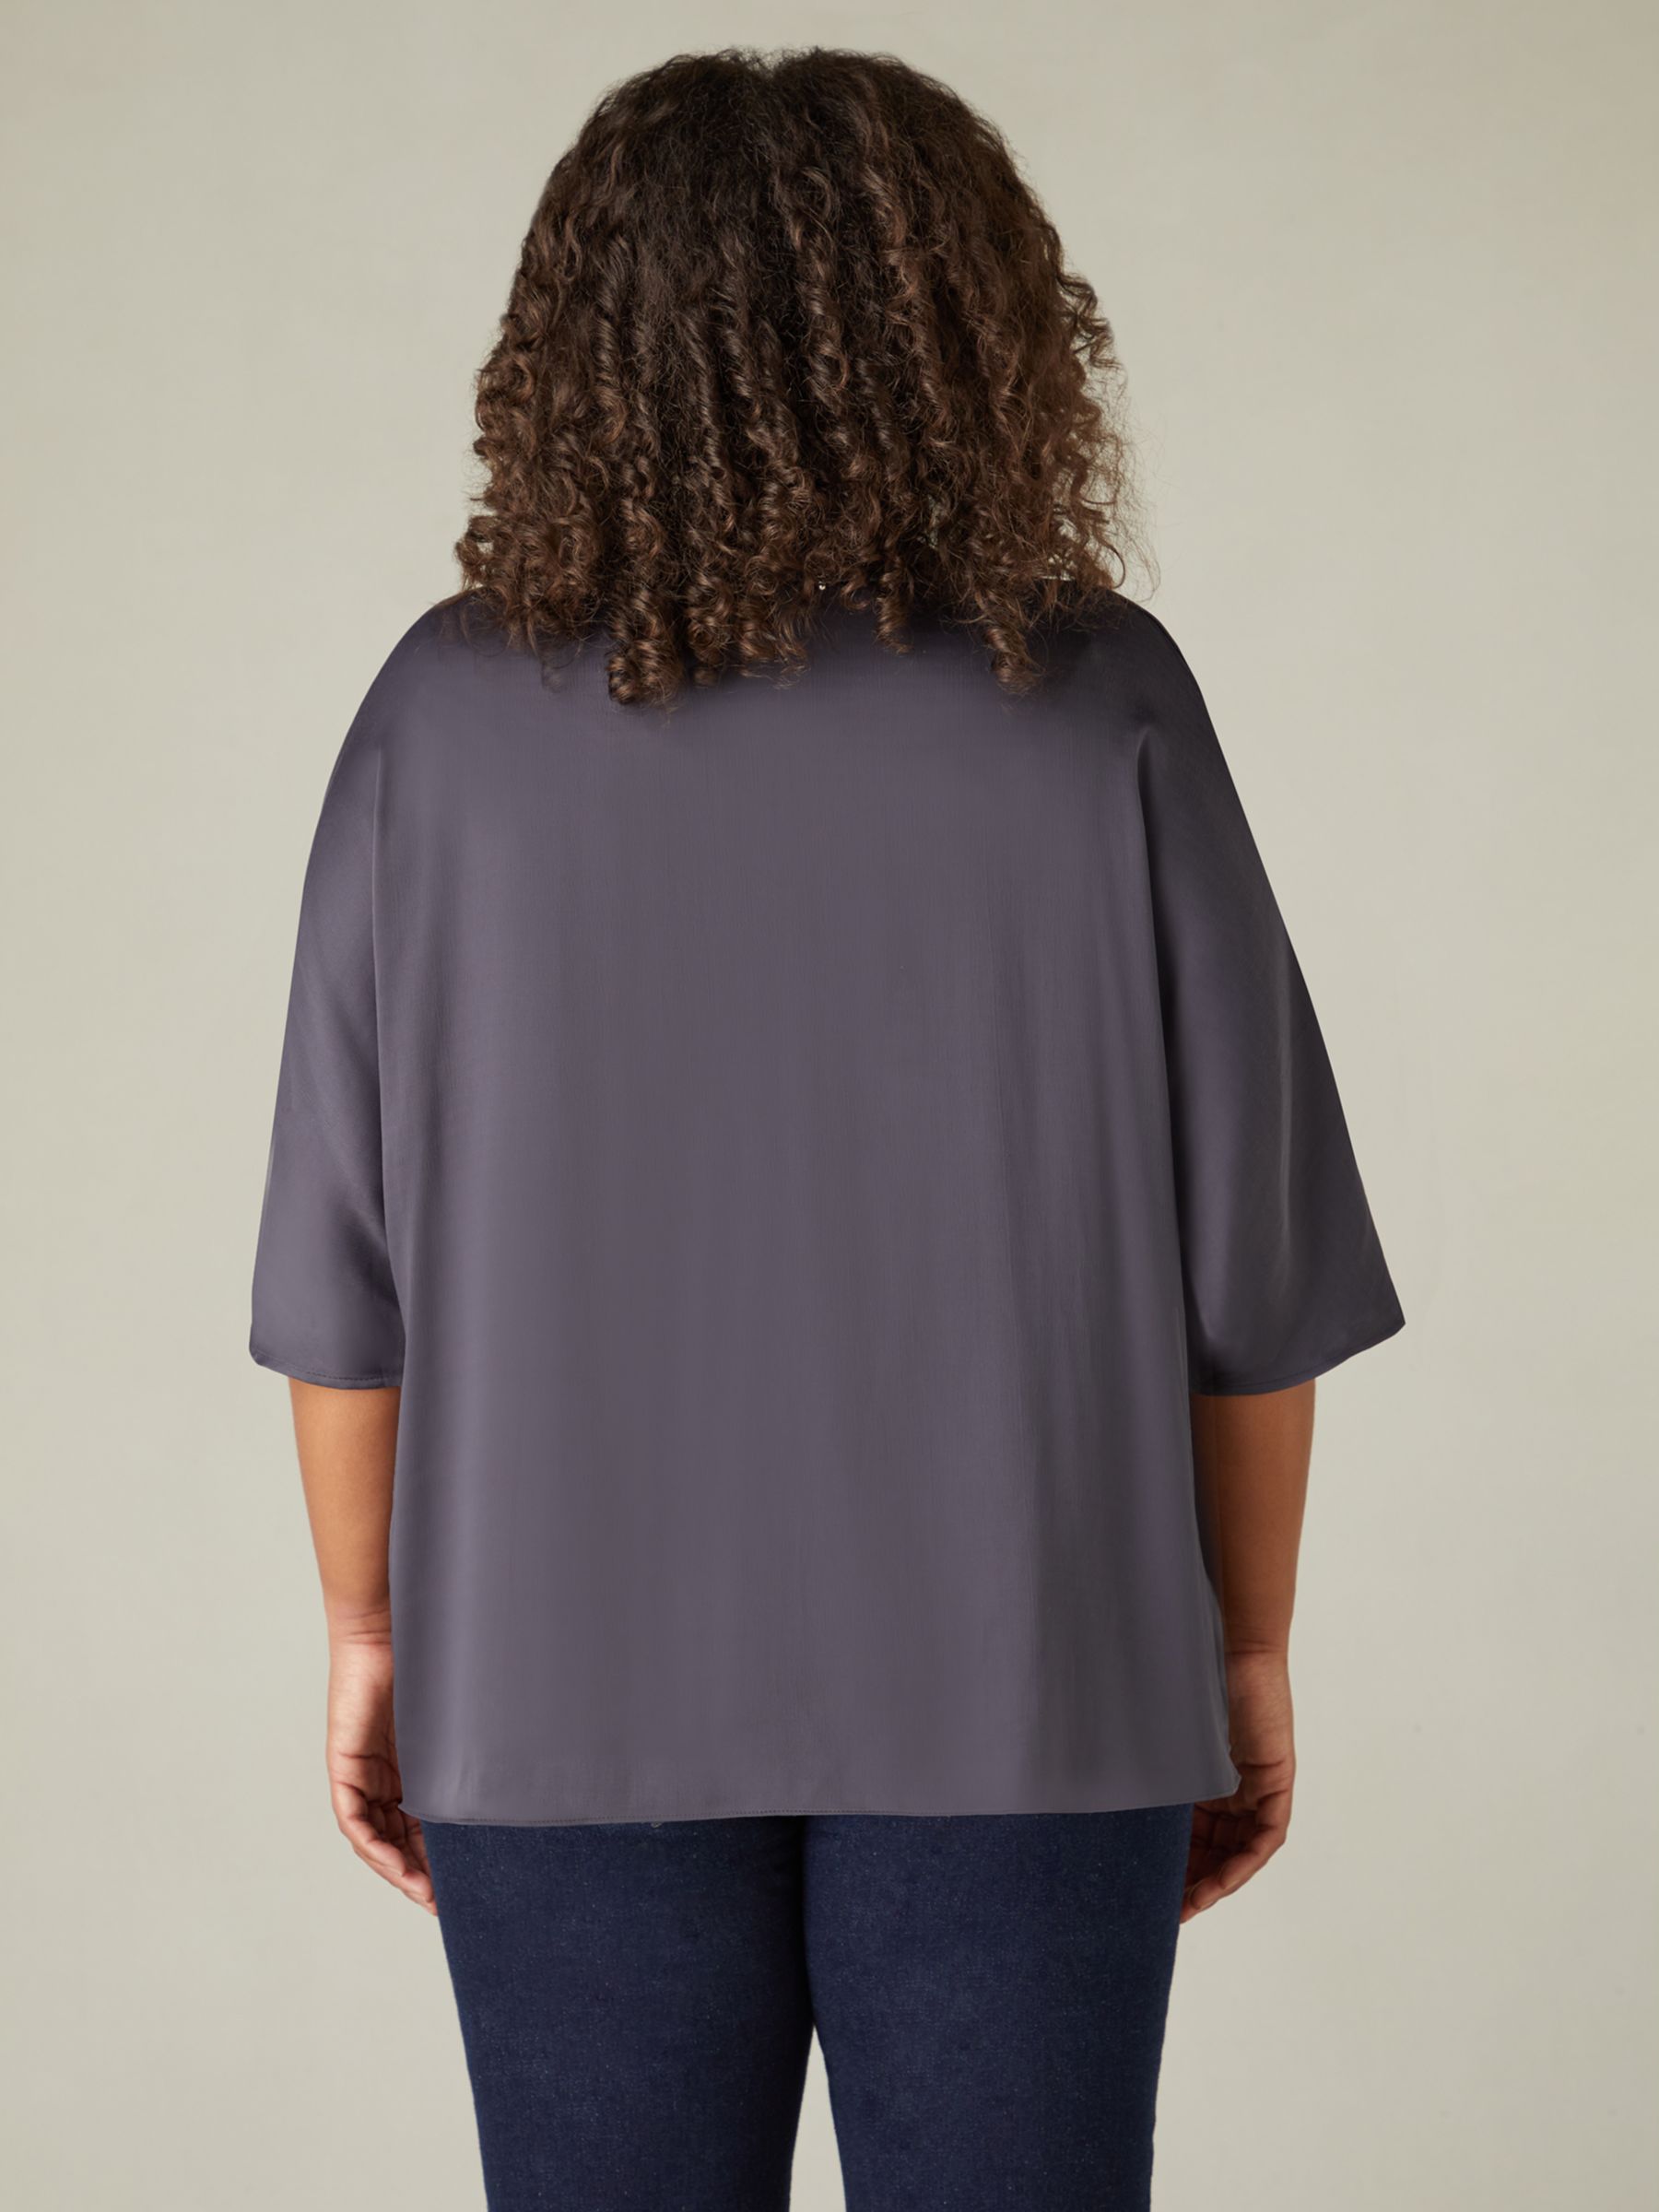 Buy Live Unlimited Satin Tie Front Cover Up, Grey Online at johnlewis.com